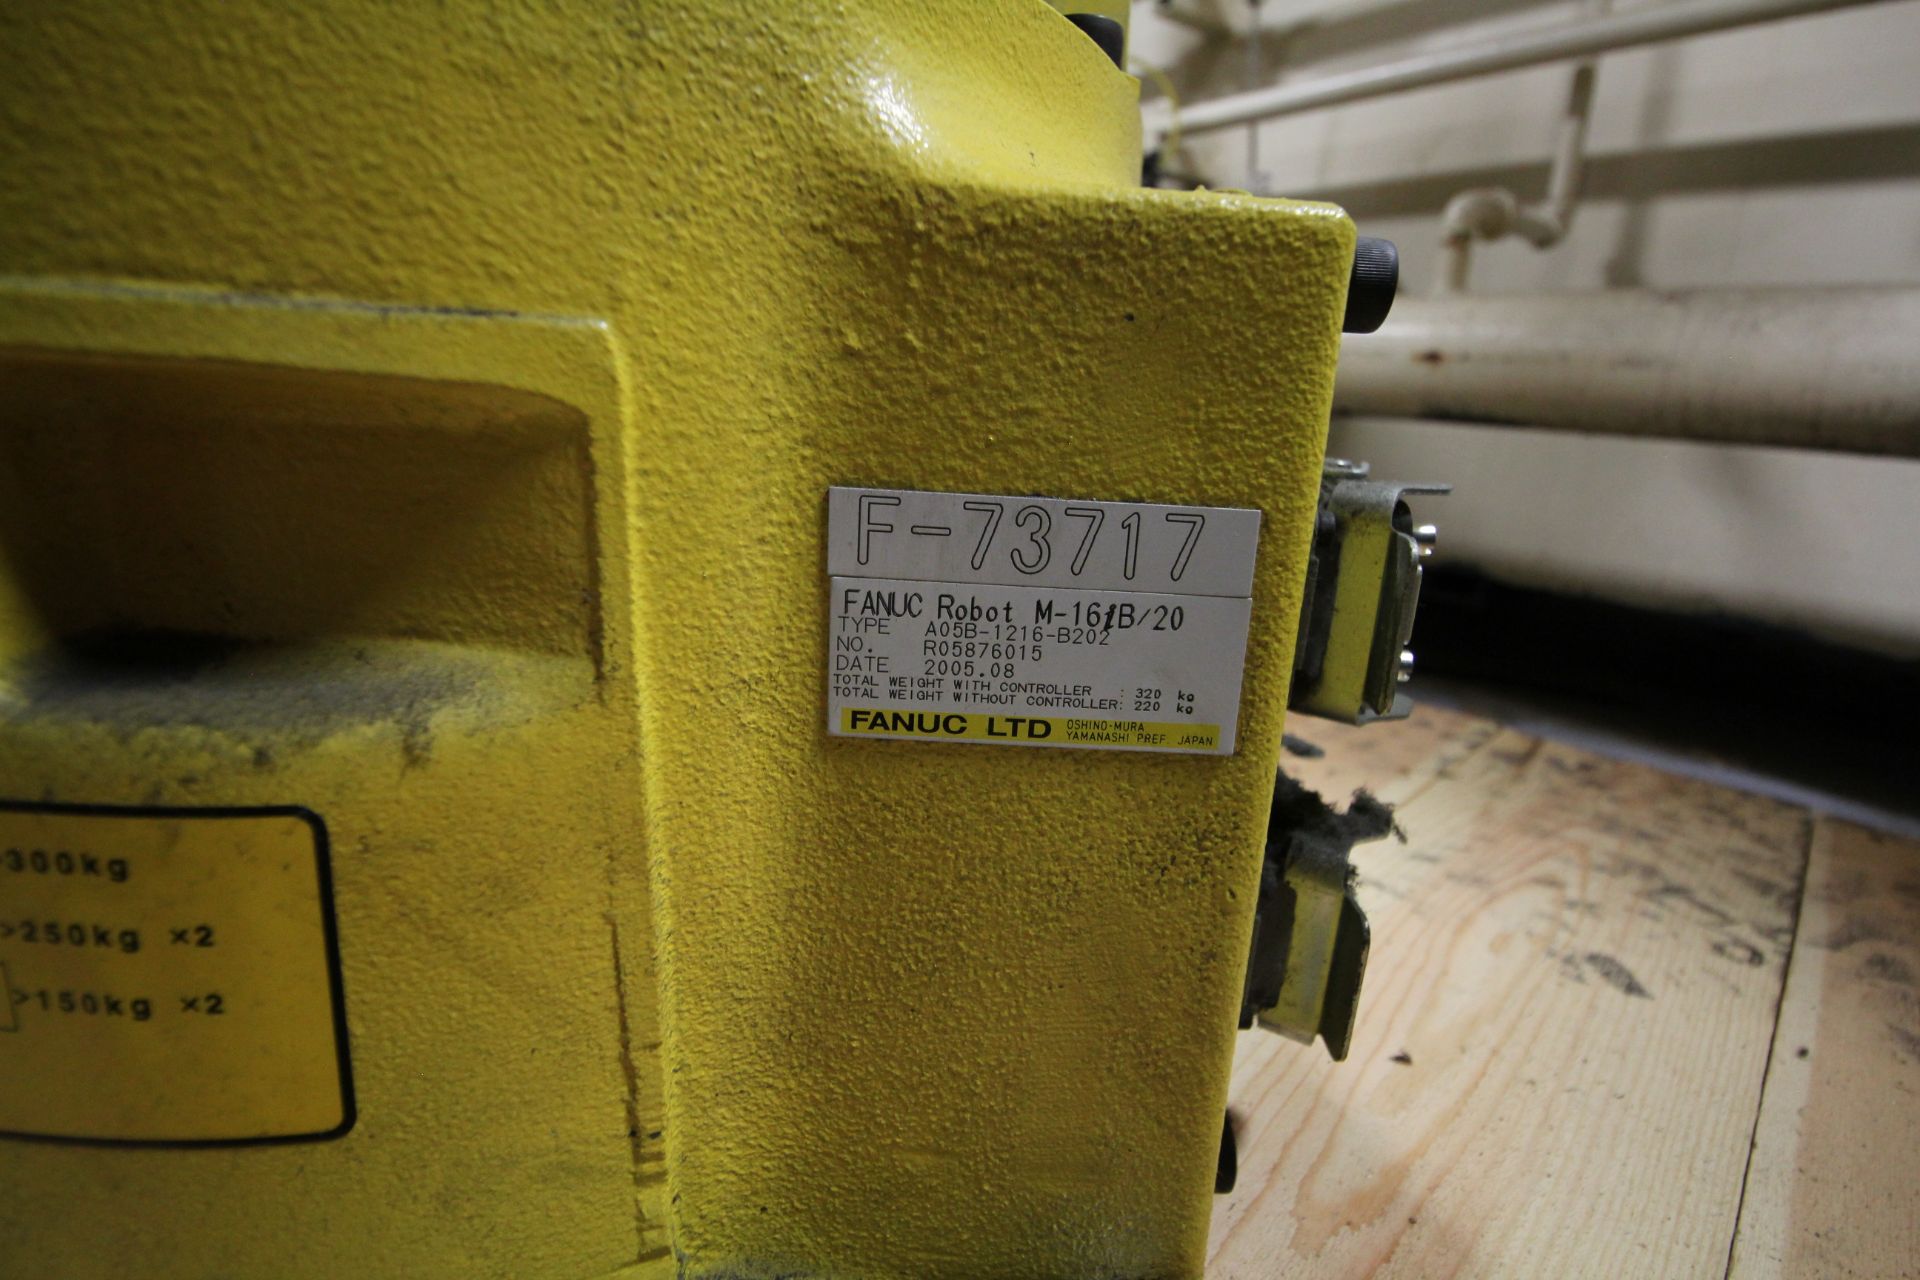 FANUC ROBOT M-16iB/20 WITH R-J3iB CONTROLS, TEACH PENDANT & CABLES, SN 73717, YEAR 2005 - Image 7 of 7